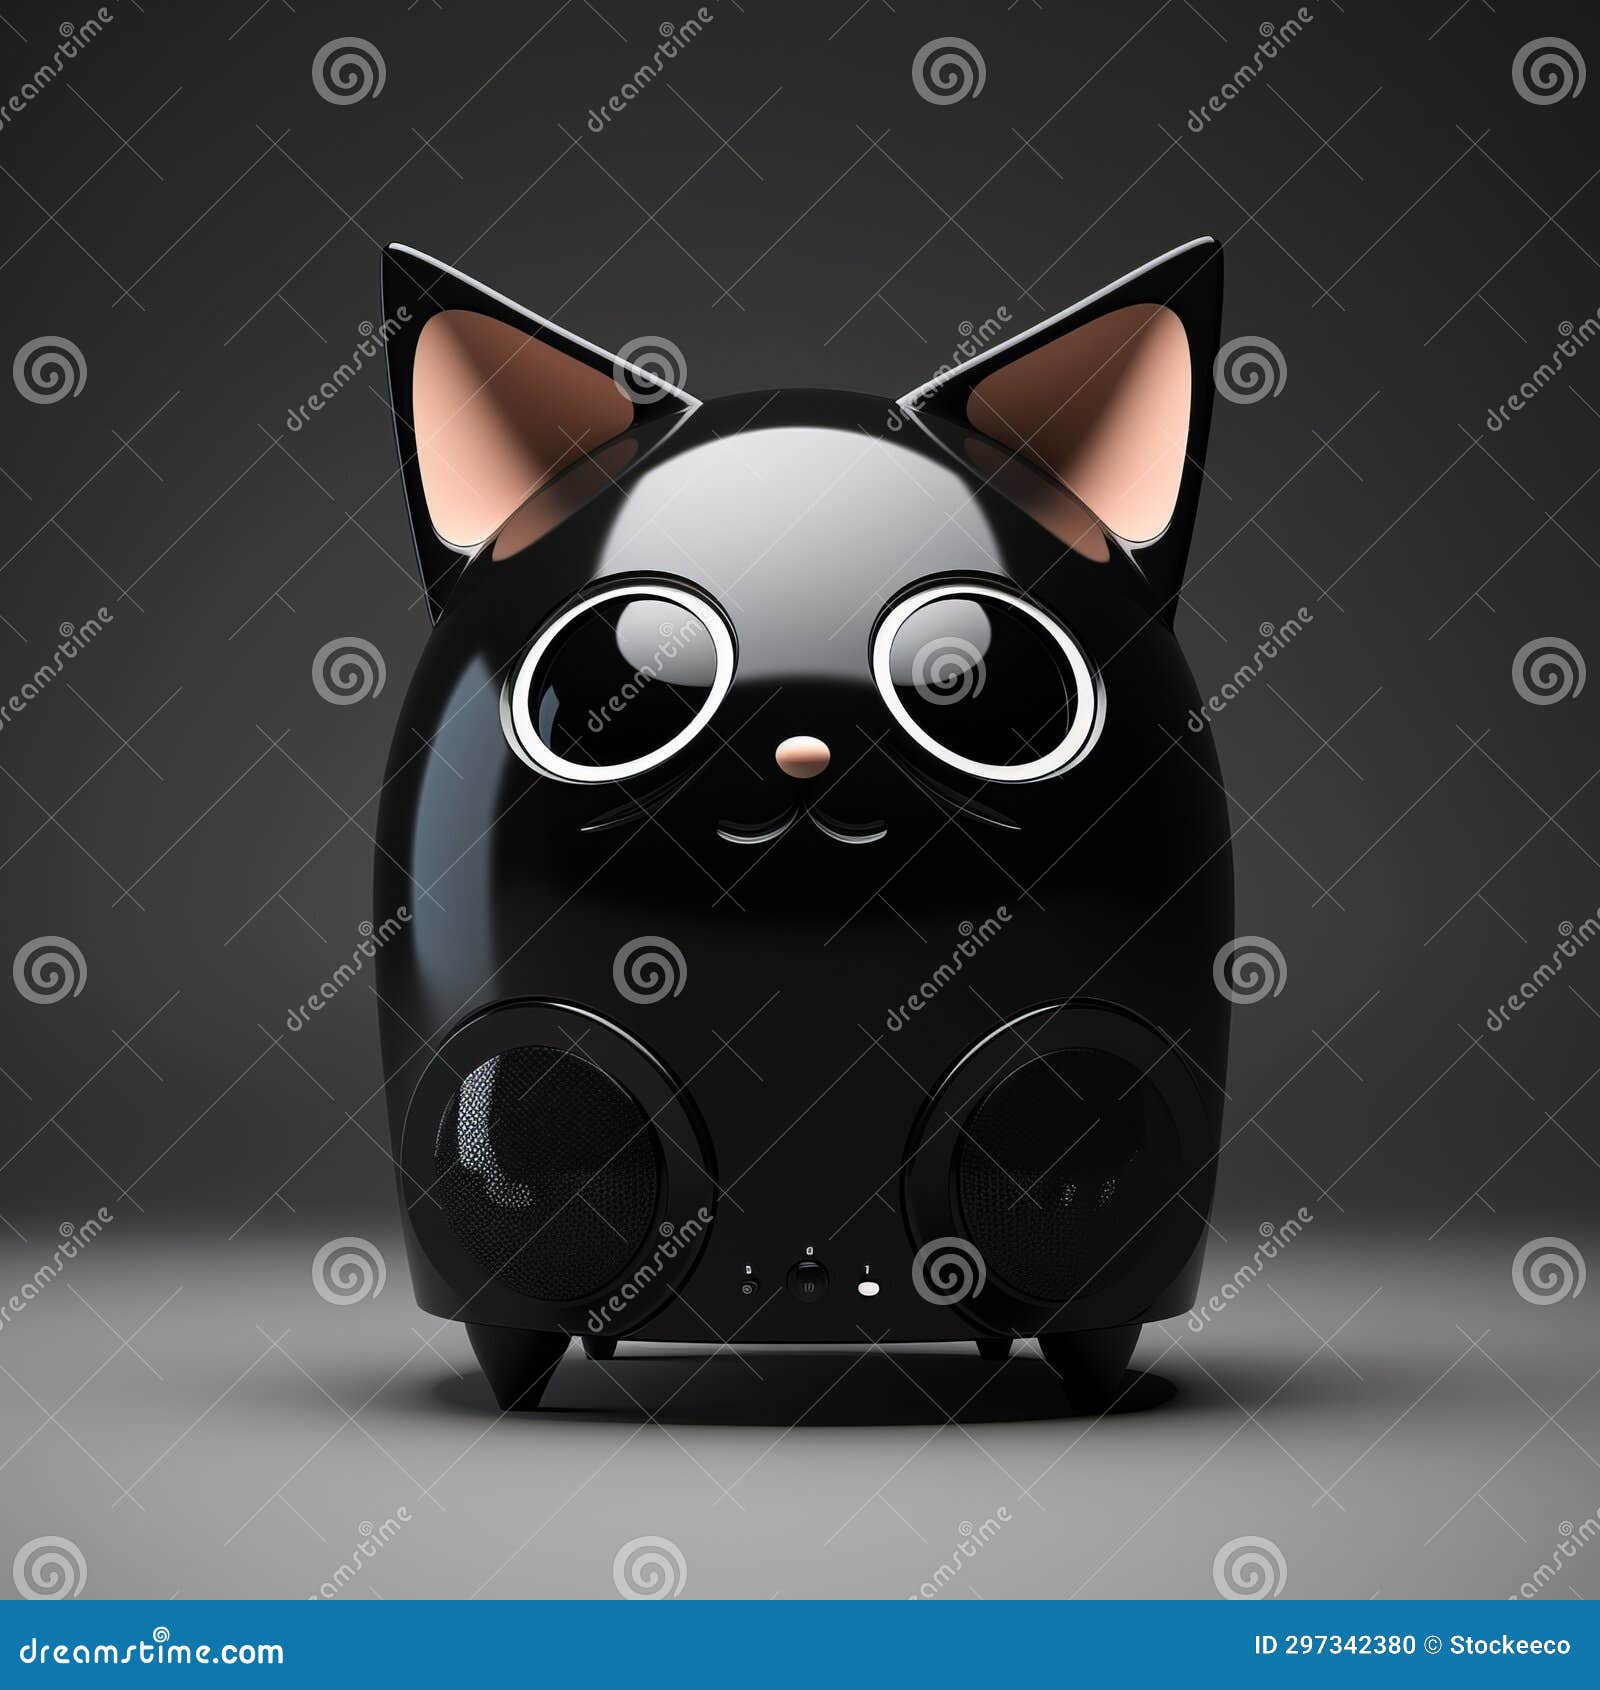 trending kitty speaker set  with gothic-influenced 3d character s